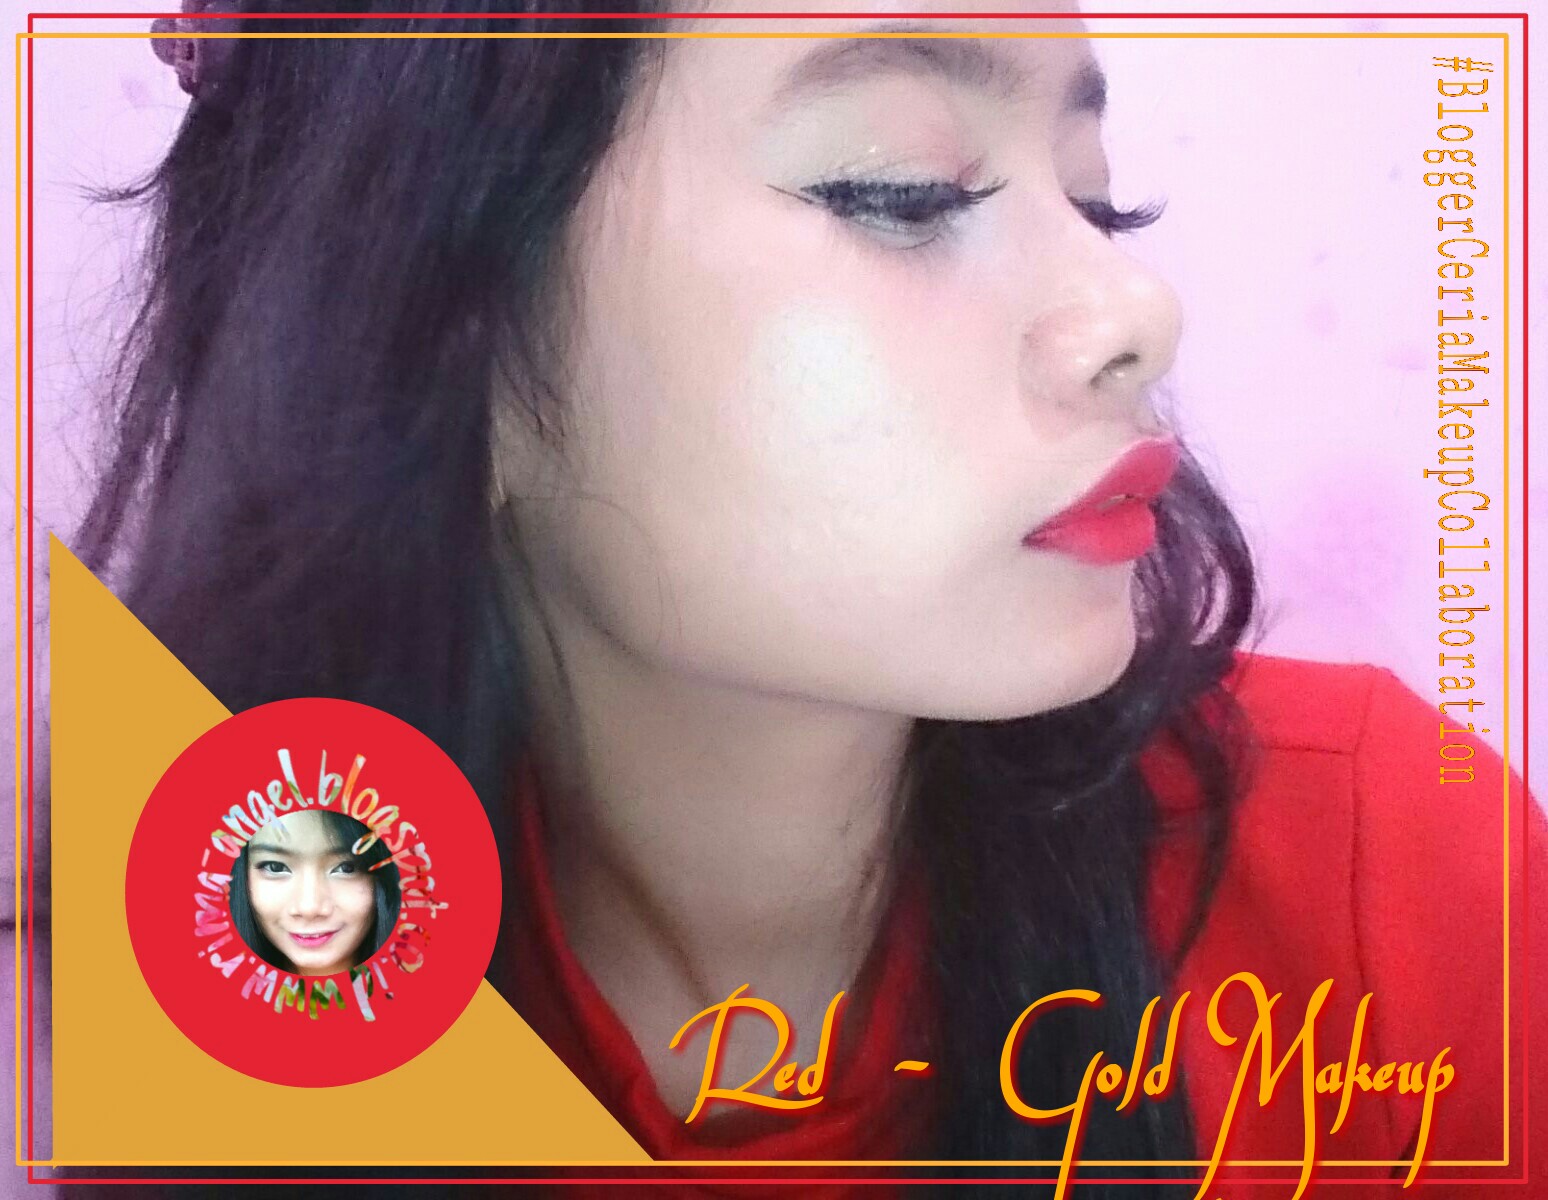 Makeup Collaboration For Imlek With Blogger Ceria Rima Angel